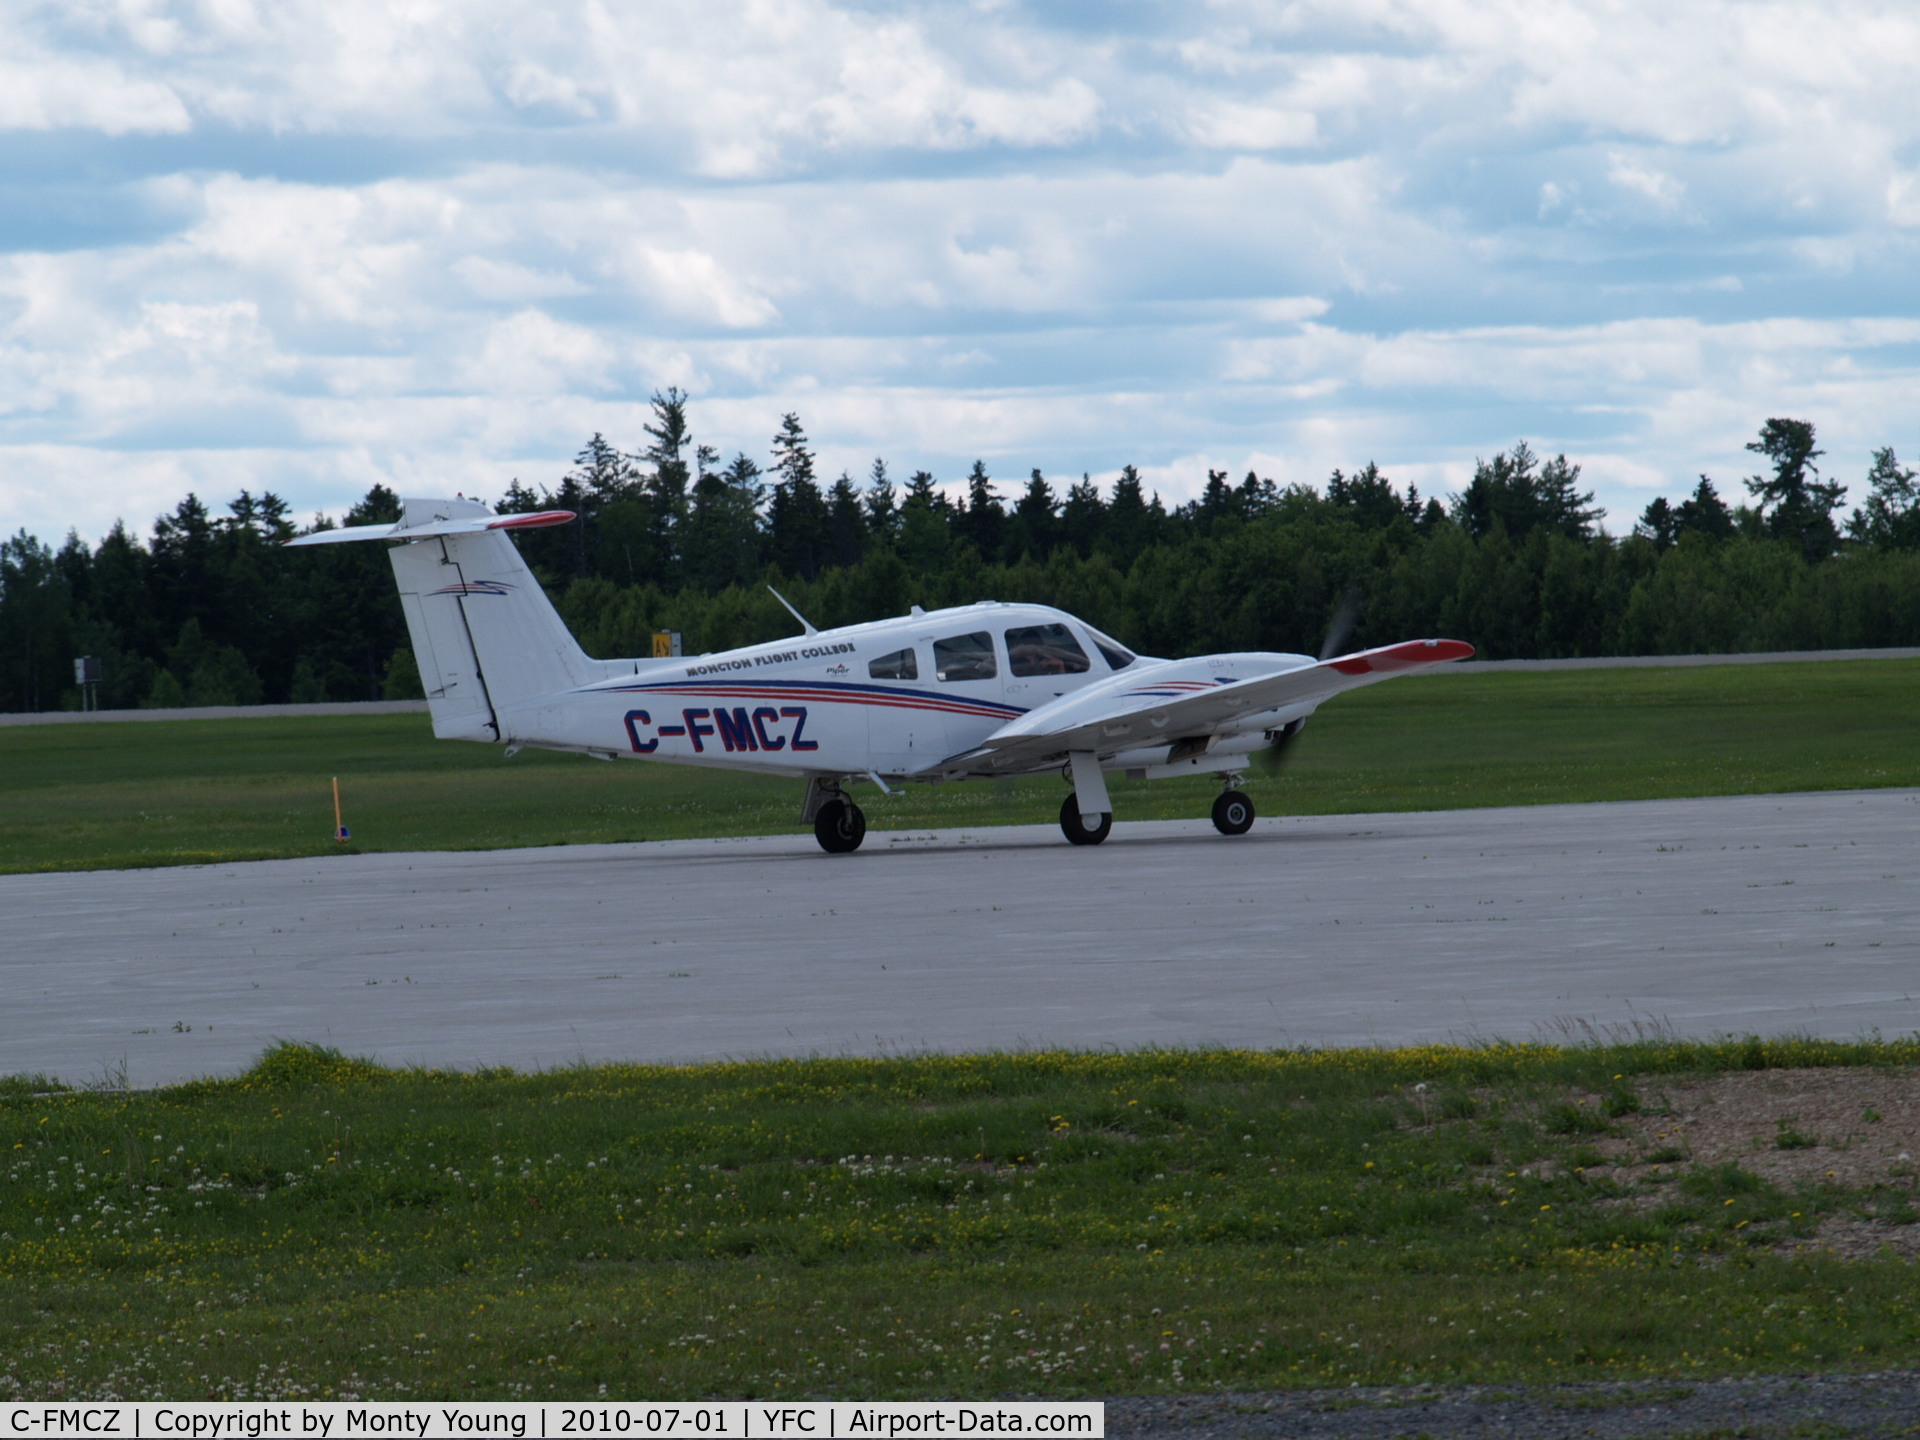 C-FMCZ, 2006 Piper PA-44-180 Seminole C/N 4496233, Operated by Moncton Flight College